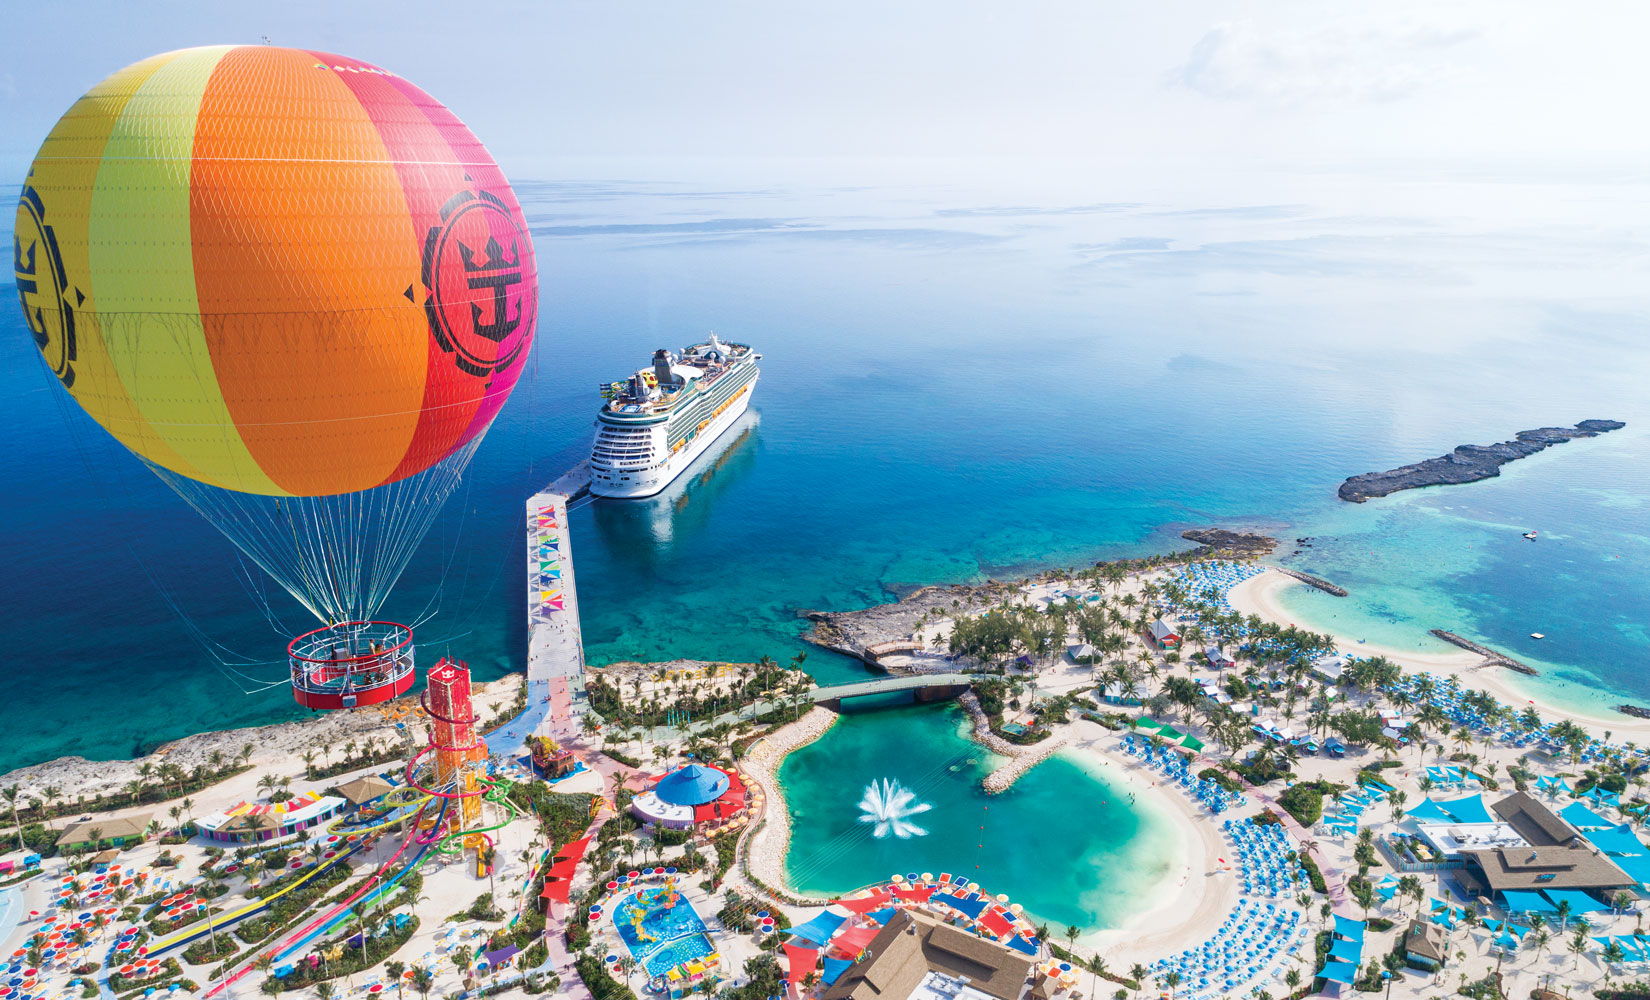 Royal Caribbean To Expand Perfect Day at CocoCay - Here’s What You Need To Know